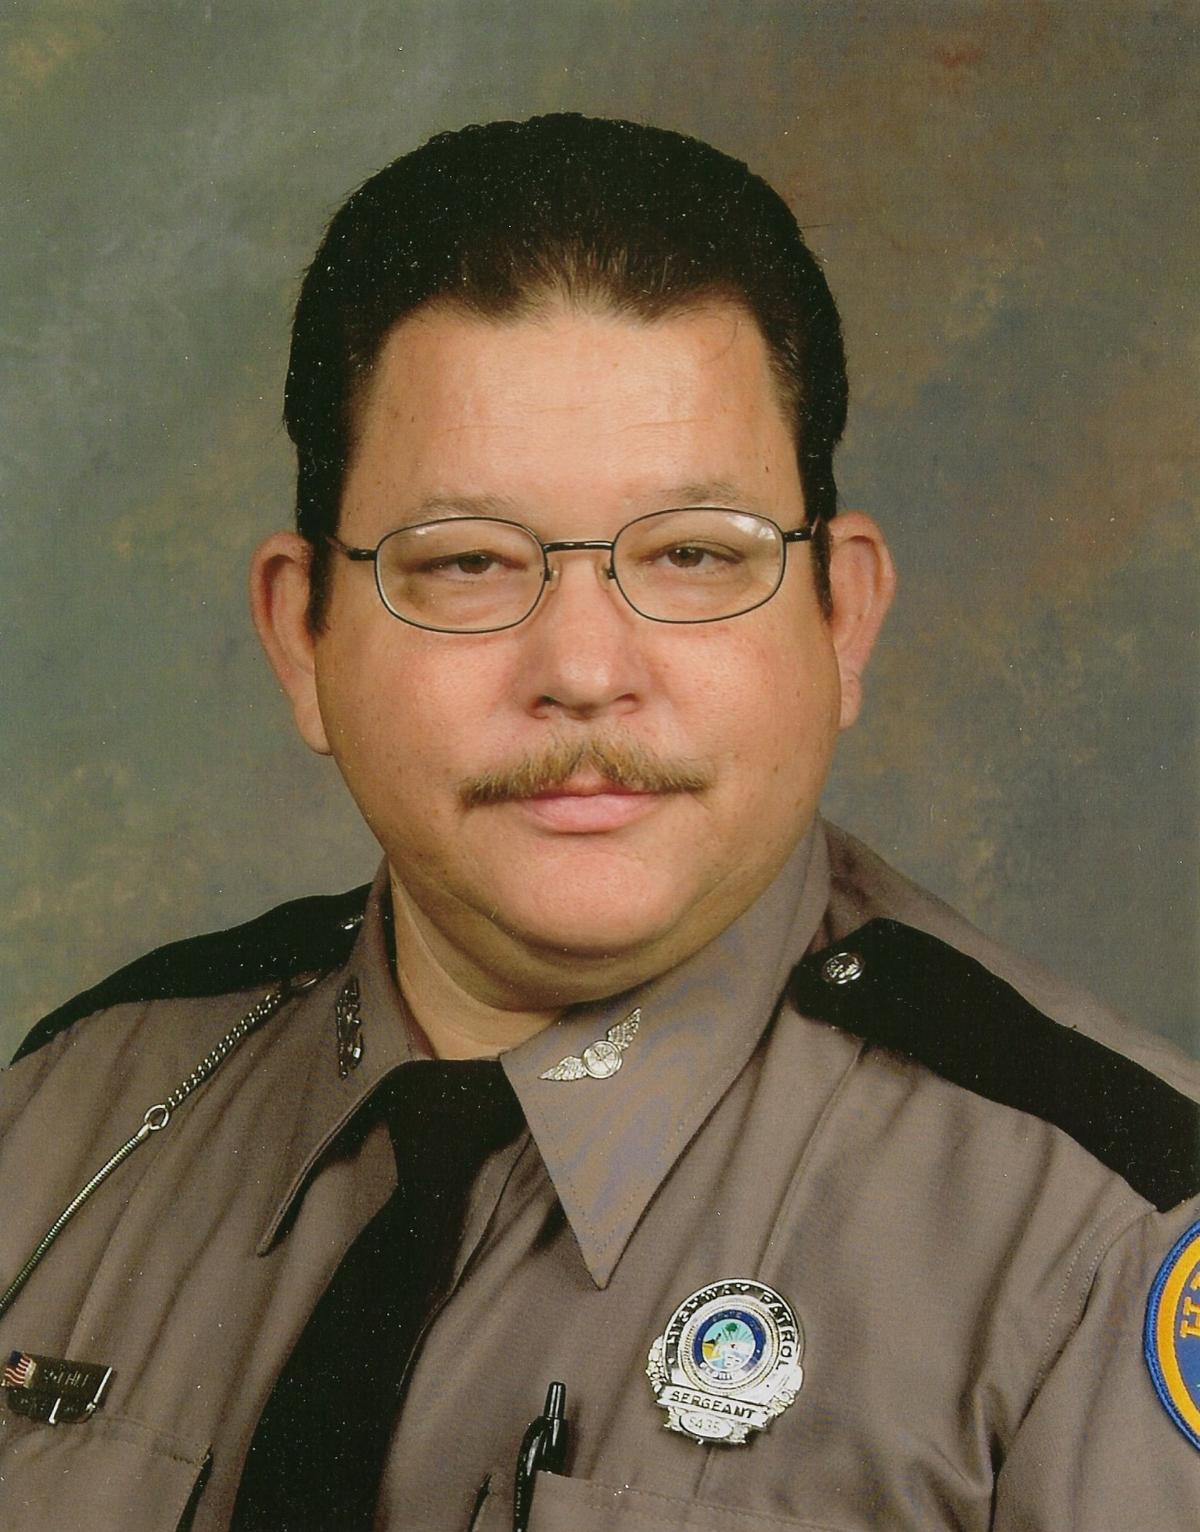 Nick Sottile was a 48-year-old sergeant with Florida Highway Patrol when he was killed in the line of duty. (Courtesy of Florida Highway Patrol)